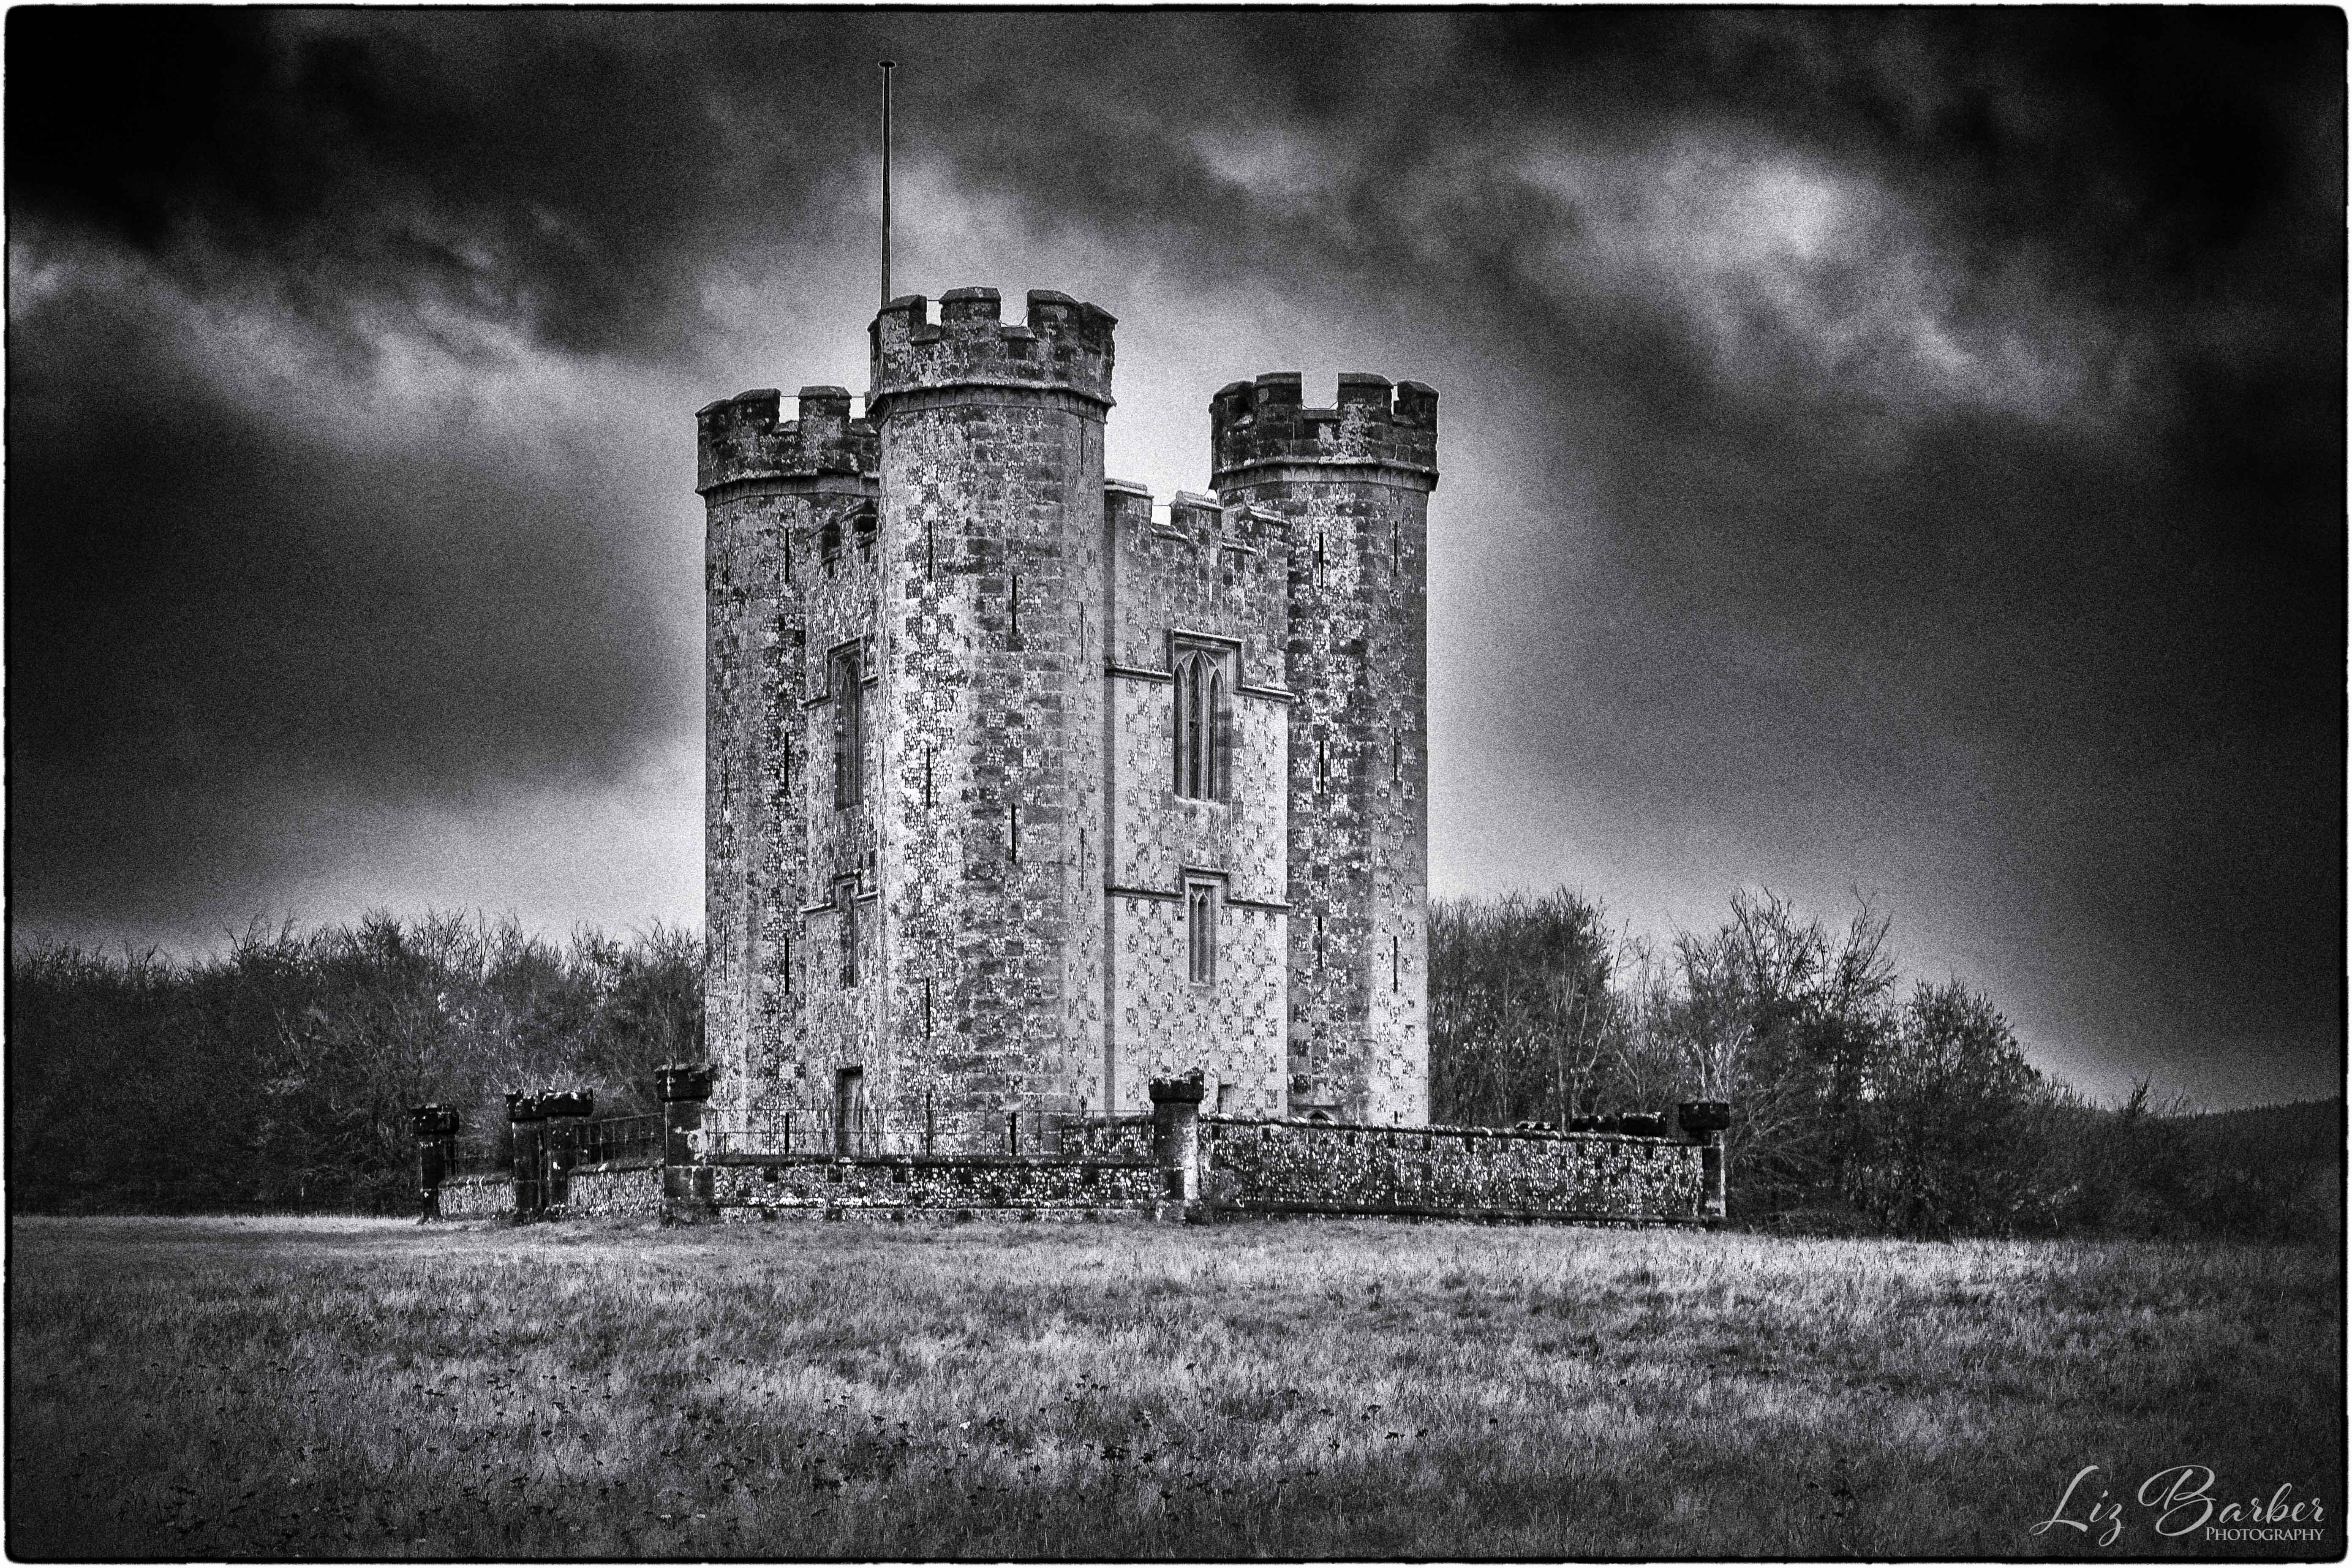 November – architecture: Hiorne’s Tower by Liz Barber